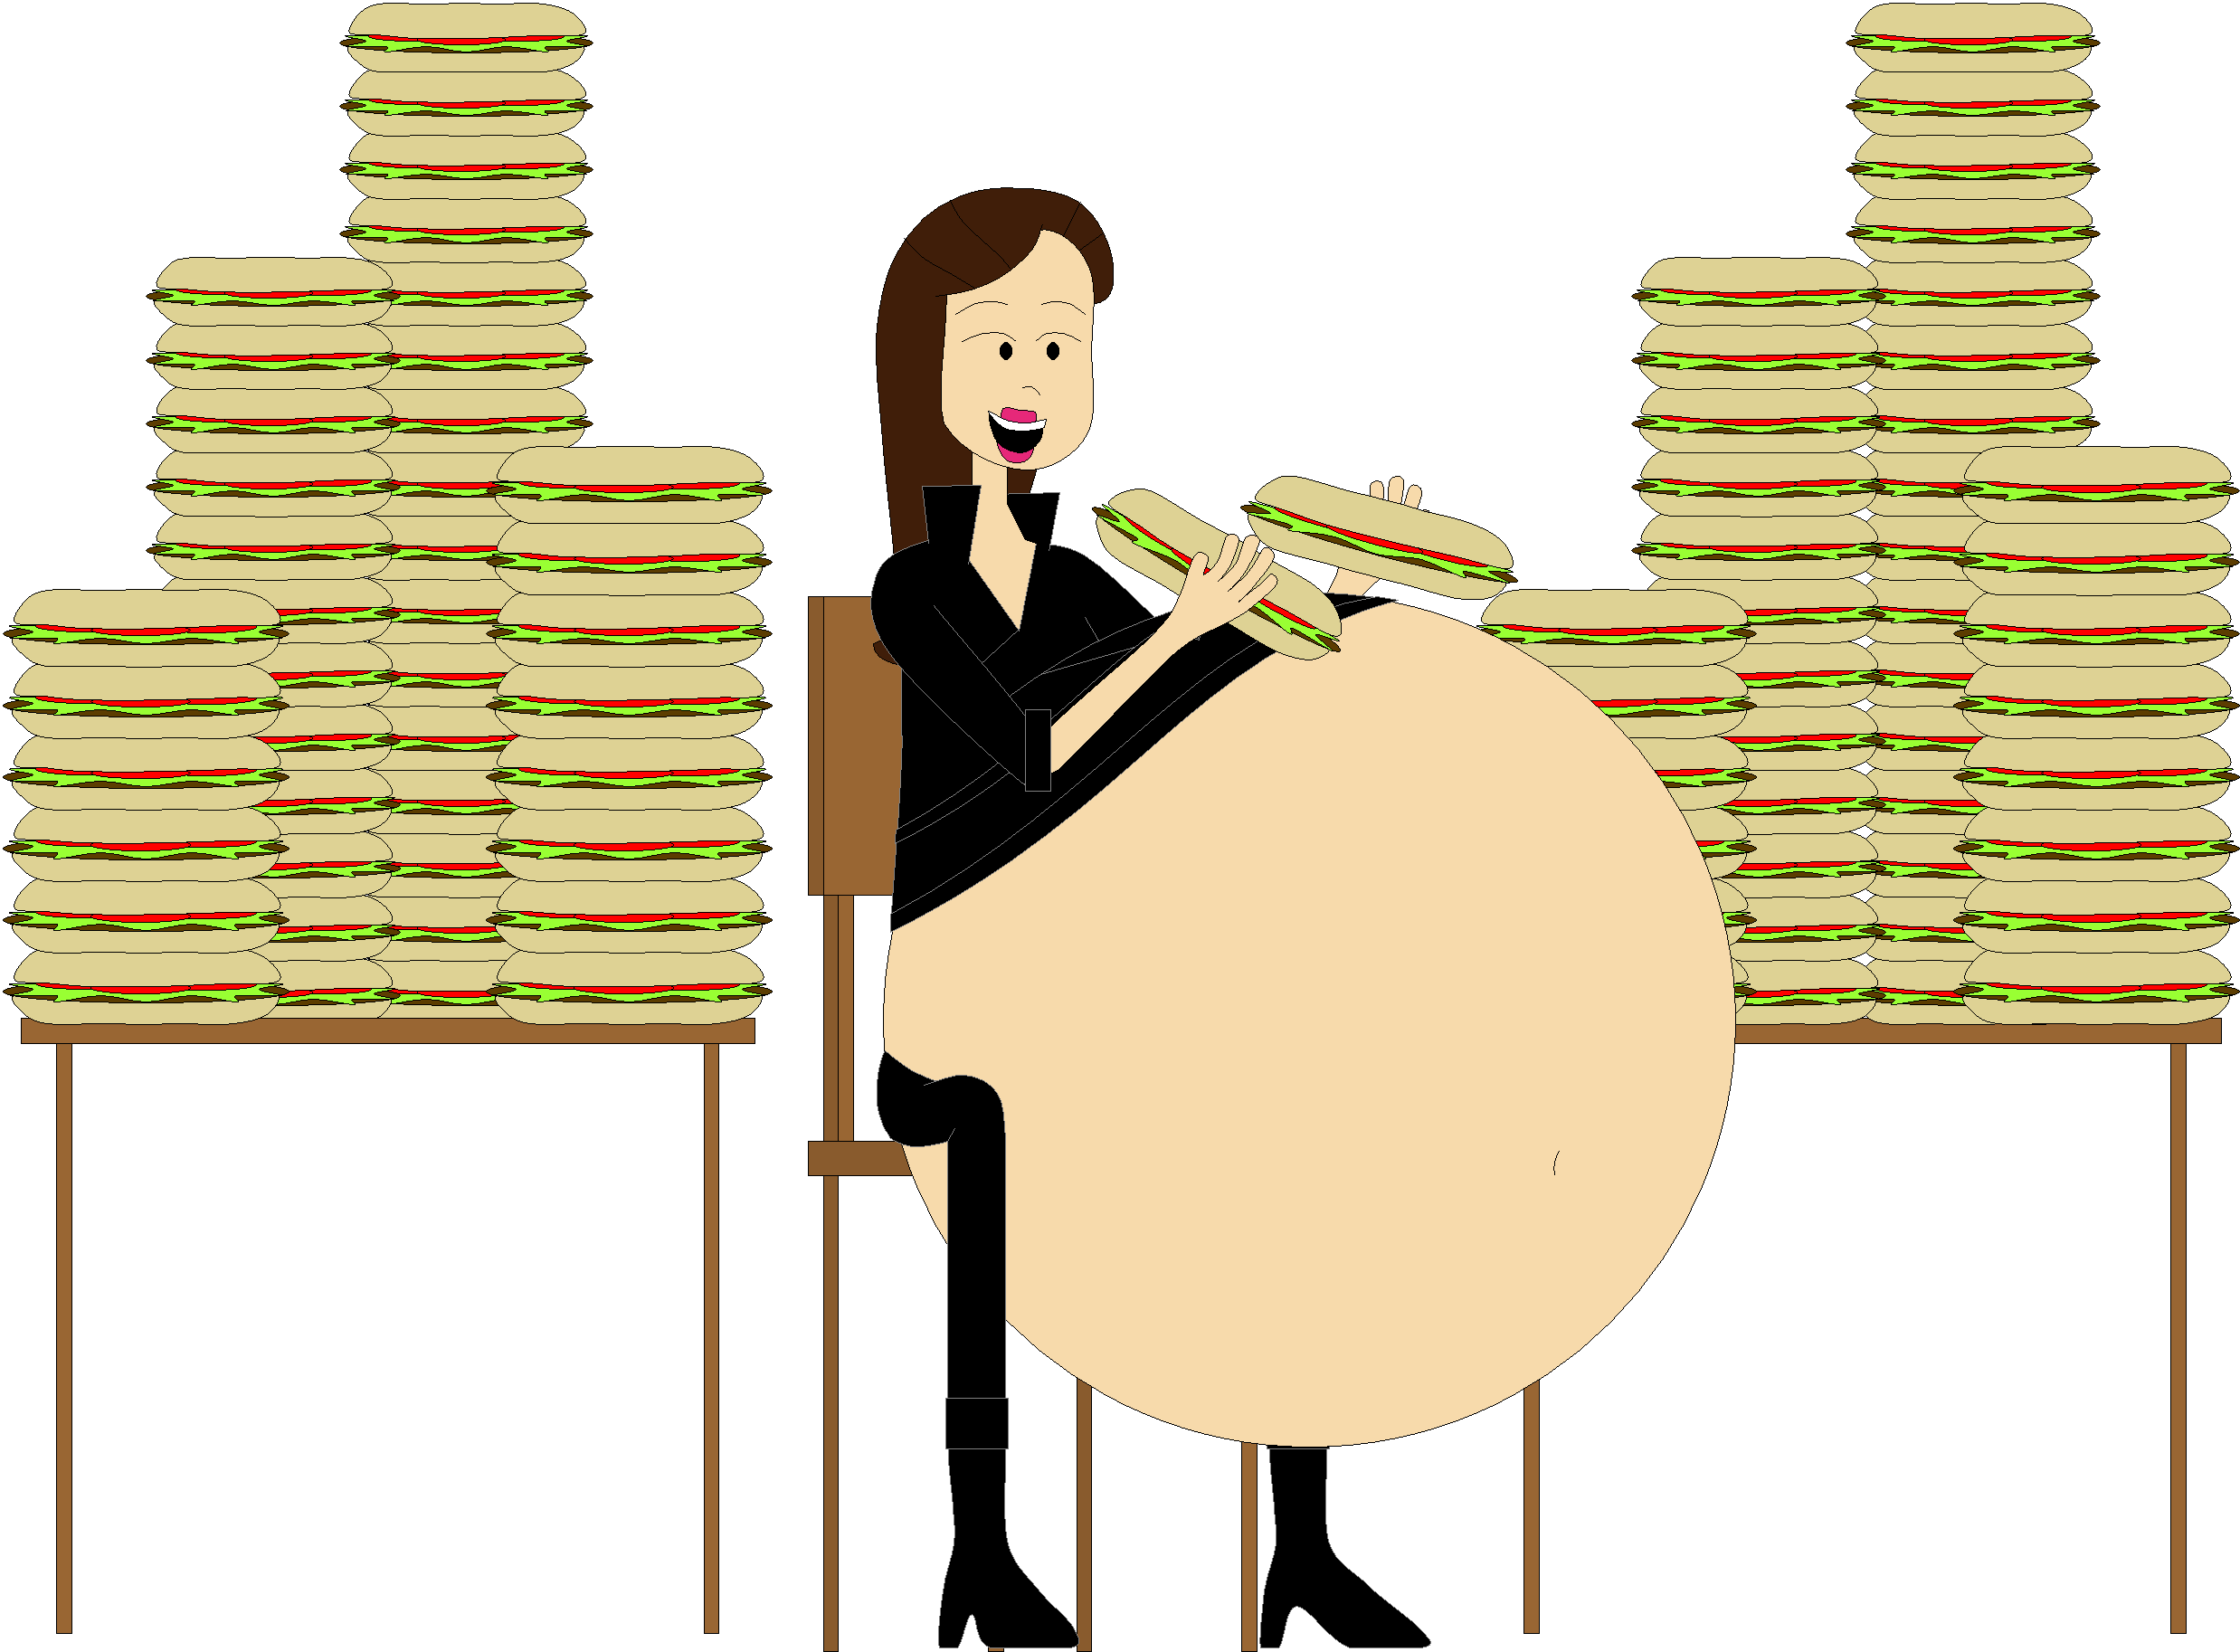 Vanessa's Sandwich Eating Challenge By Angry Signs - Food Challenge (2476x1826)